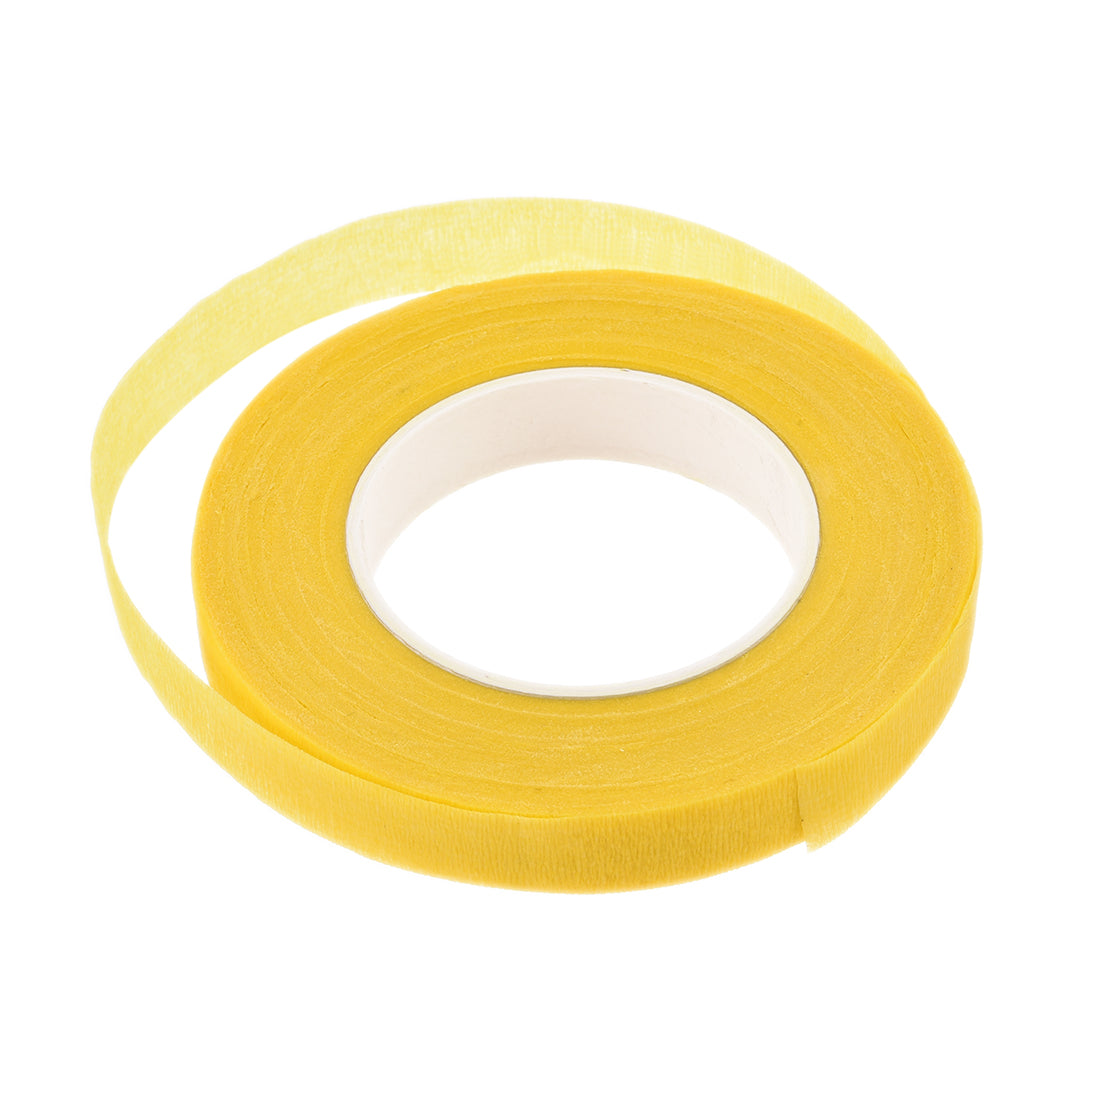 uxcell Uxcell 1Roll 1/2"x30Yard Yellow Floral Tape Flower Adhesives Floral Arrangement Kit